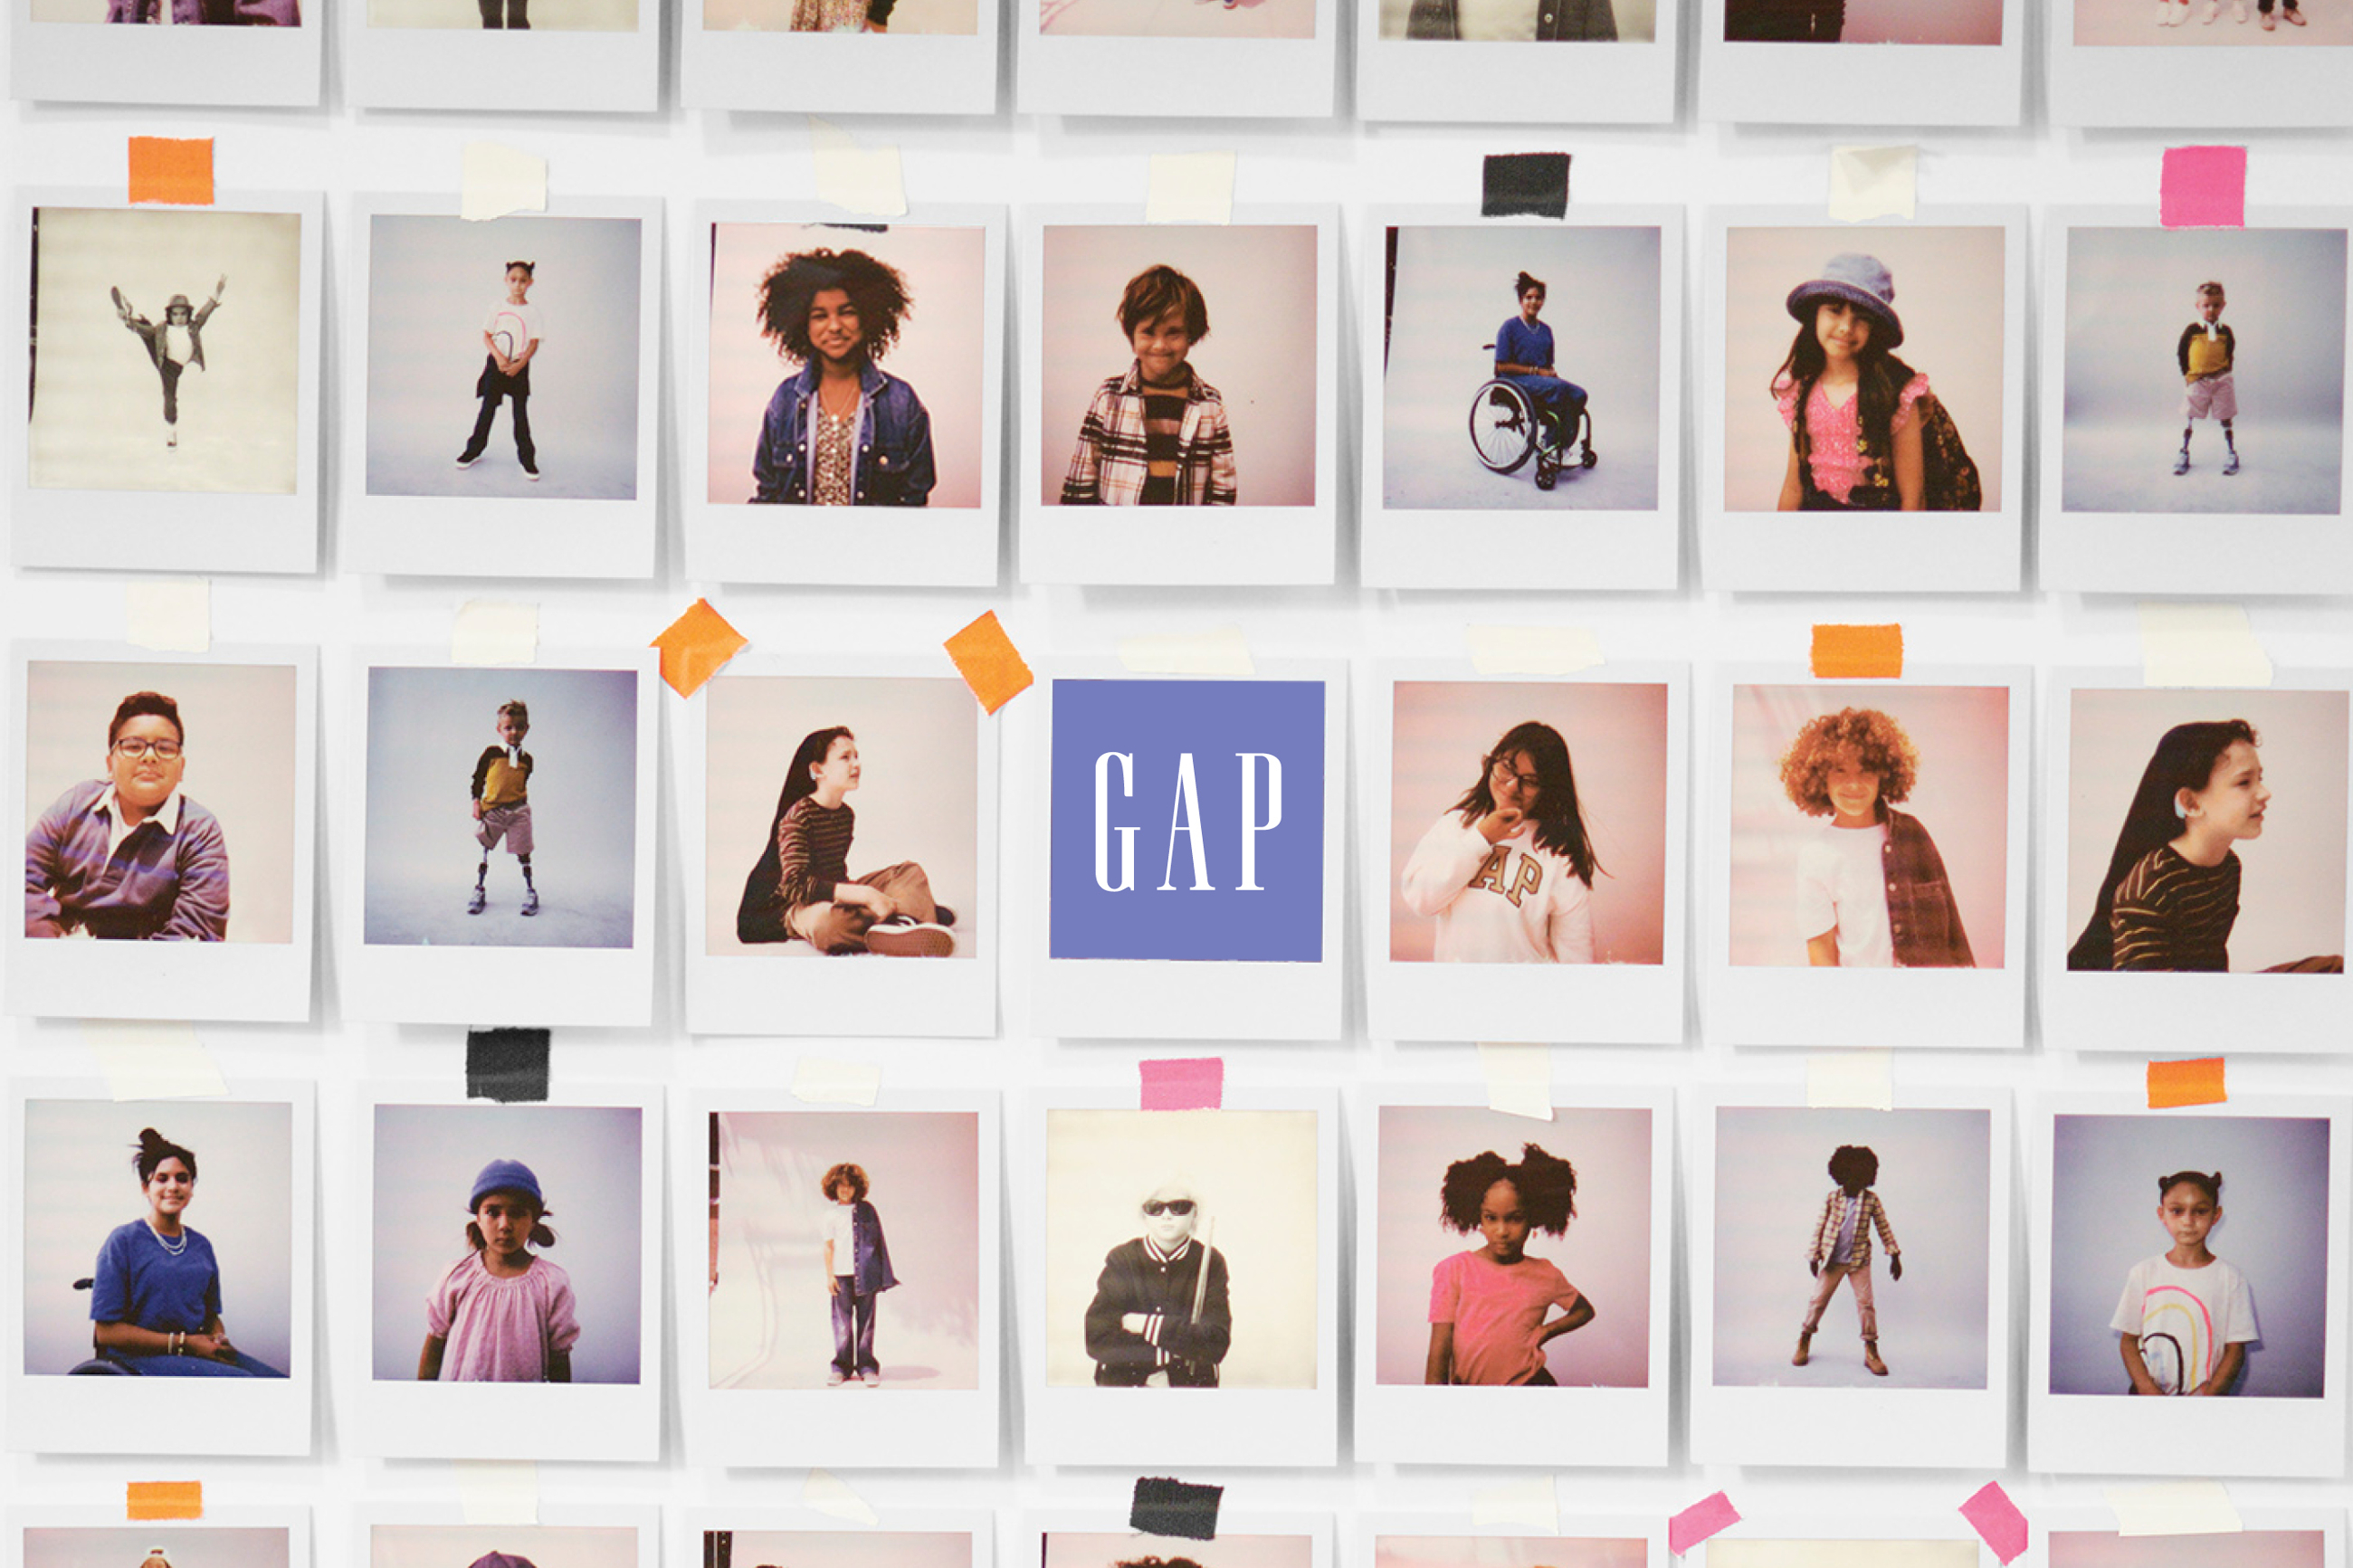 Gap's fall campaign champions individuality and the freedom to be yourself